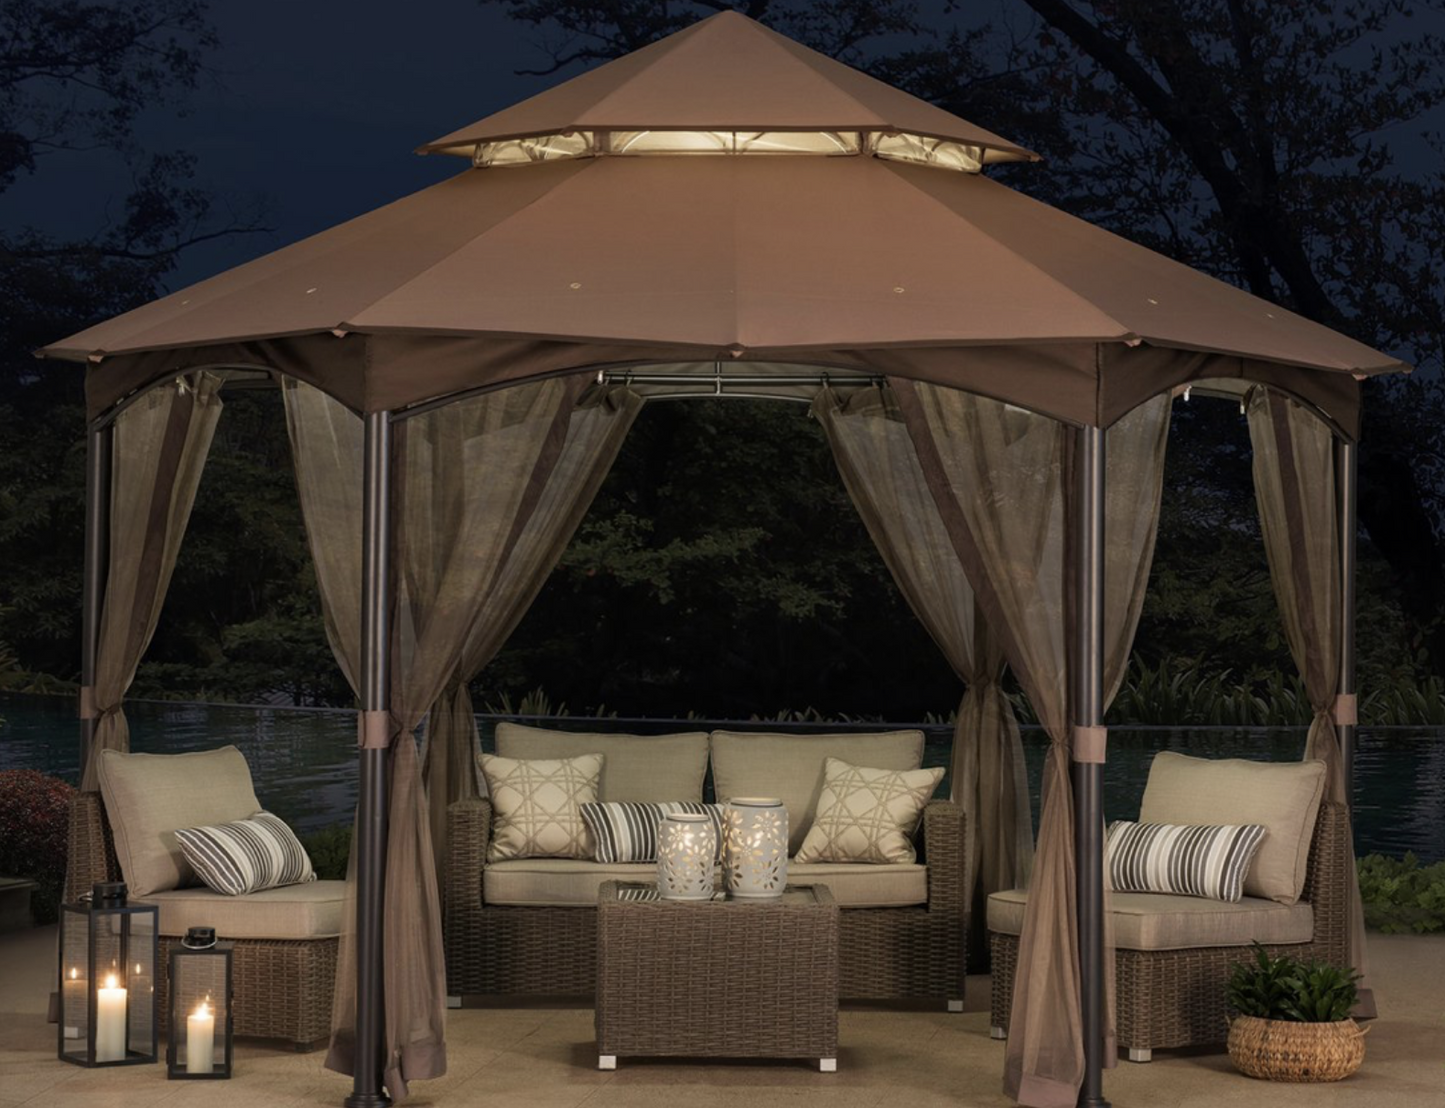 Sunjoy Khaki Replacement Canopy and netting For South Bay Hexagon Gazebo (14X14 Ft) L-GZ793PST-A Sold At BigLots